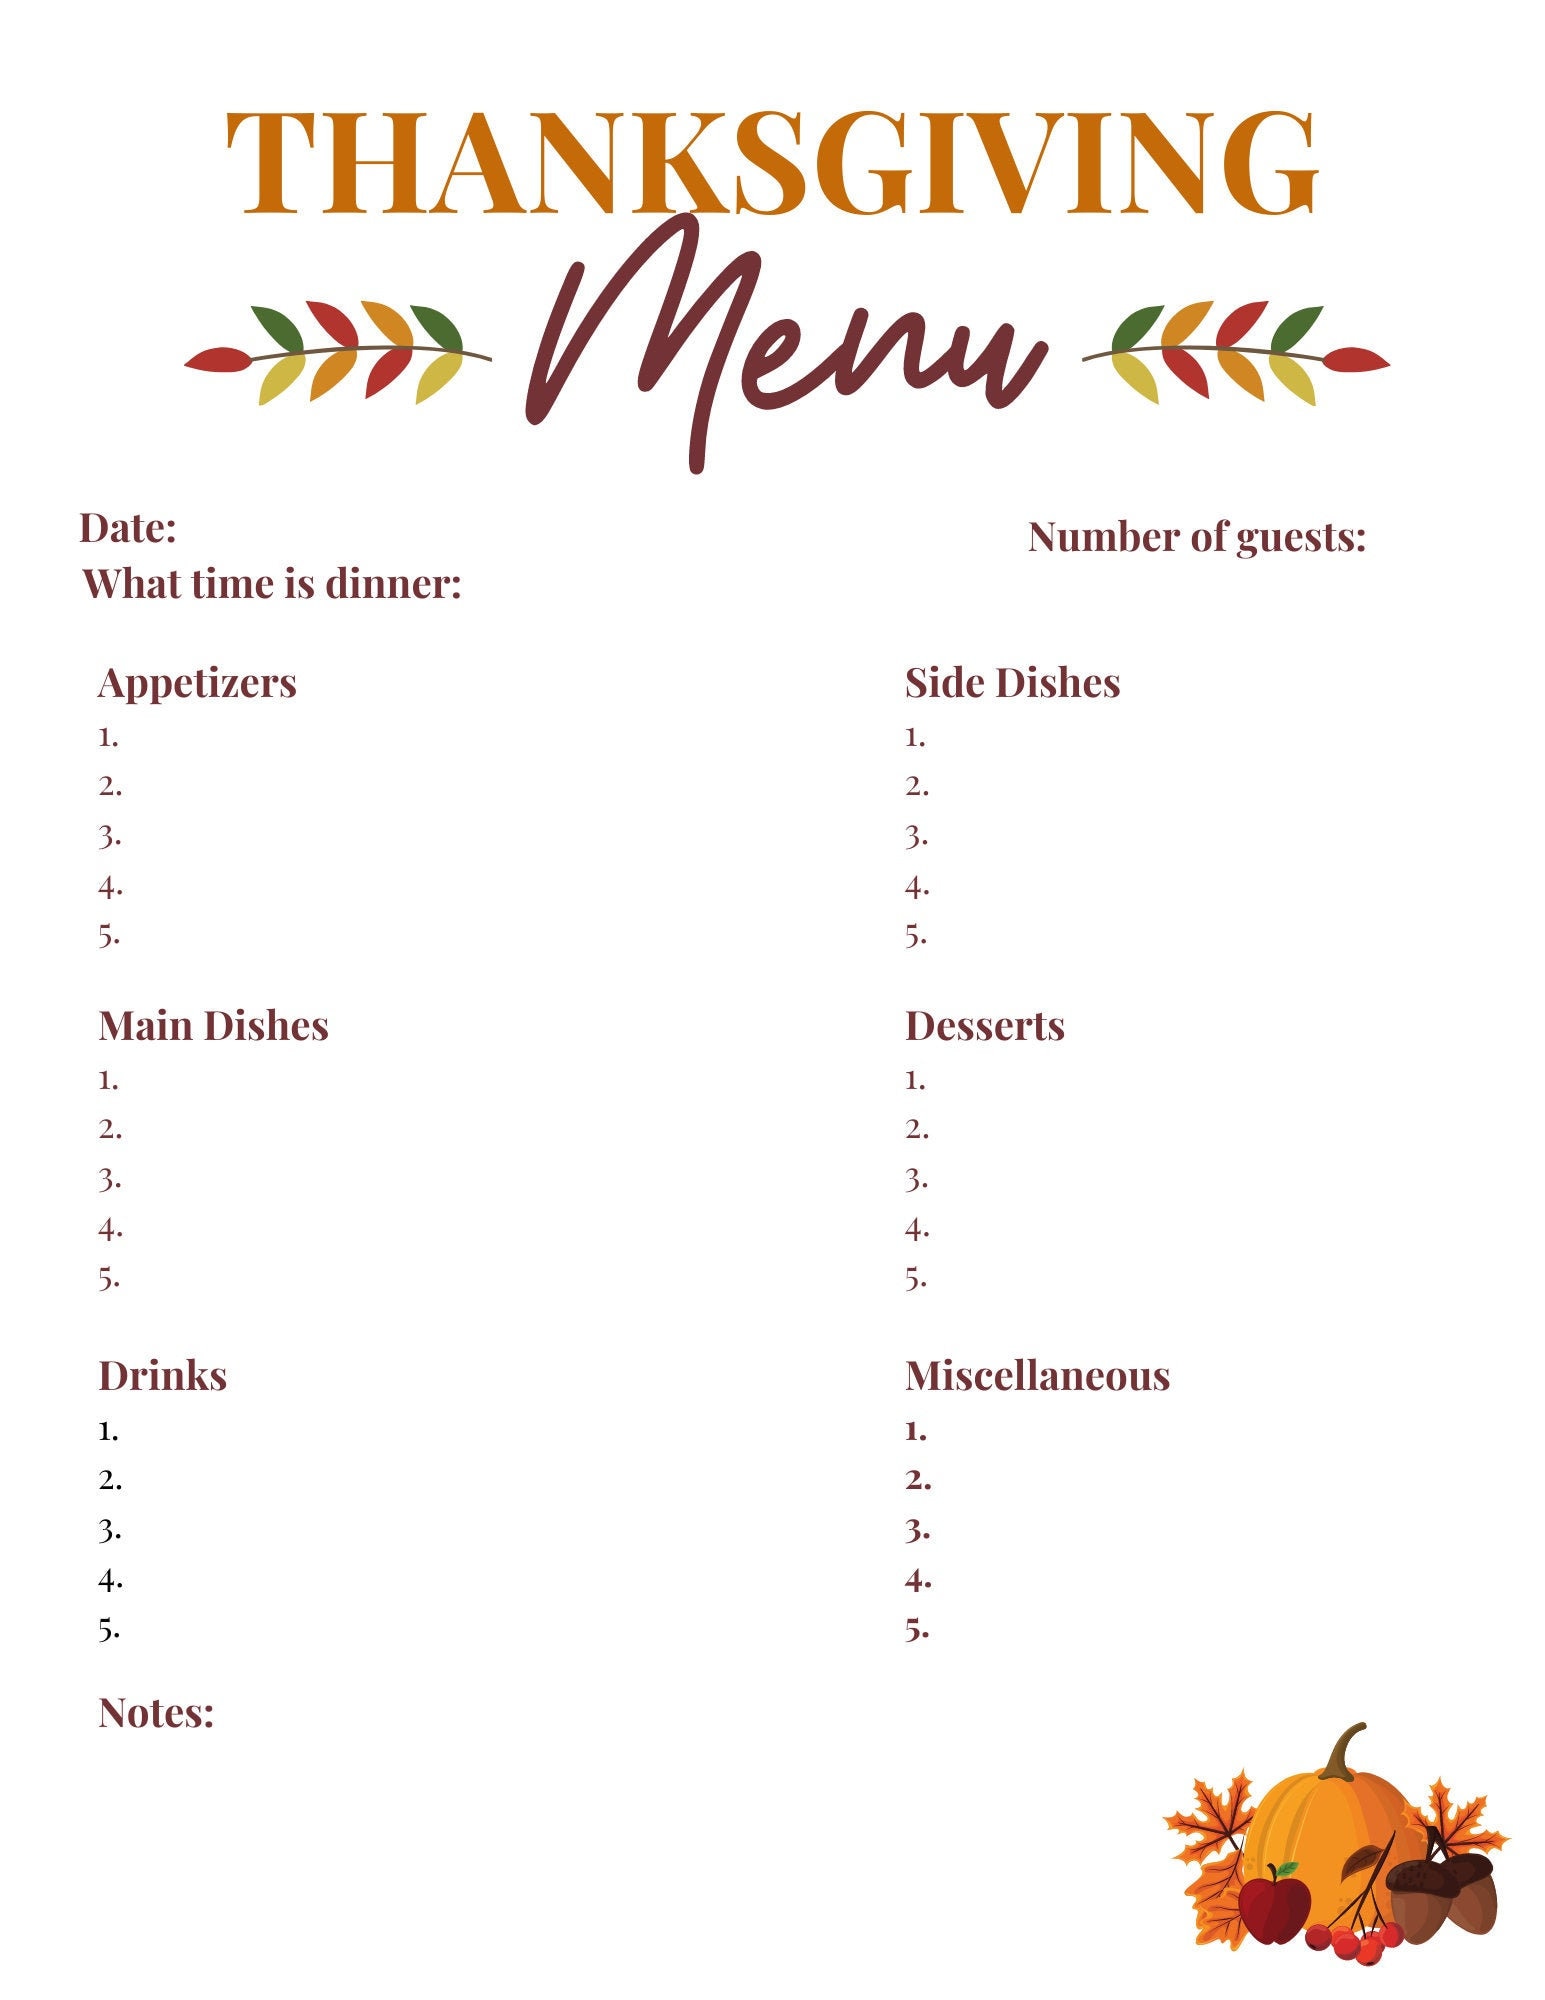 INSTANT DOWNLOAD Thanksgiving Menu and Shopping List - Etsy